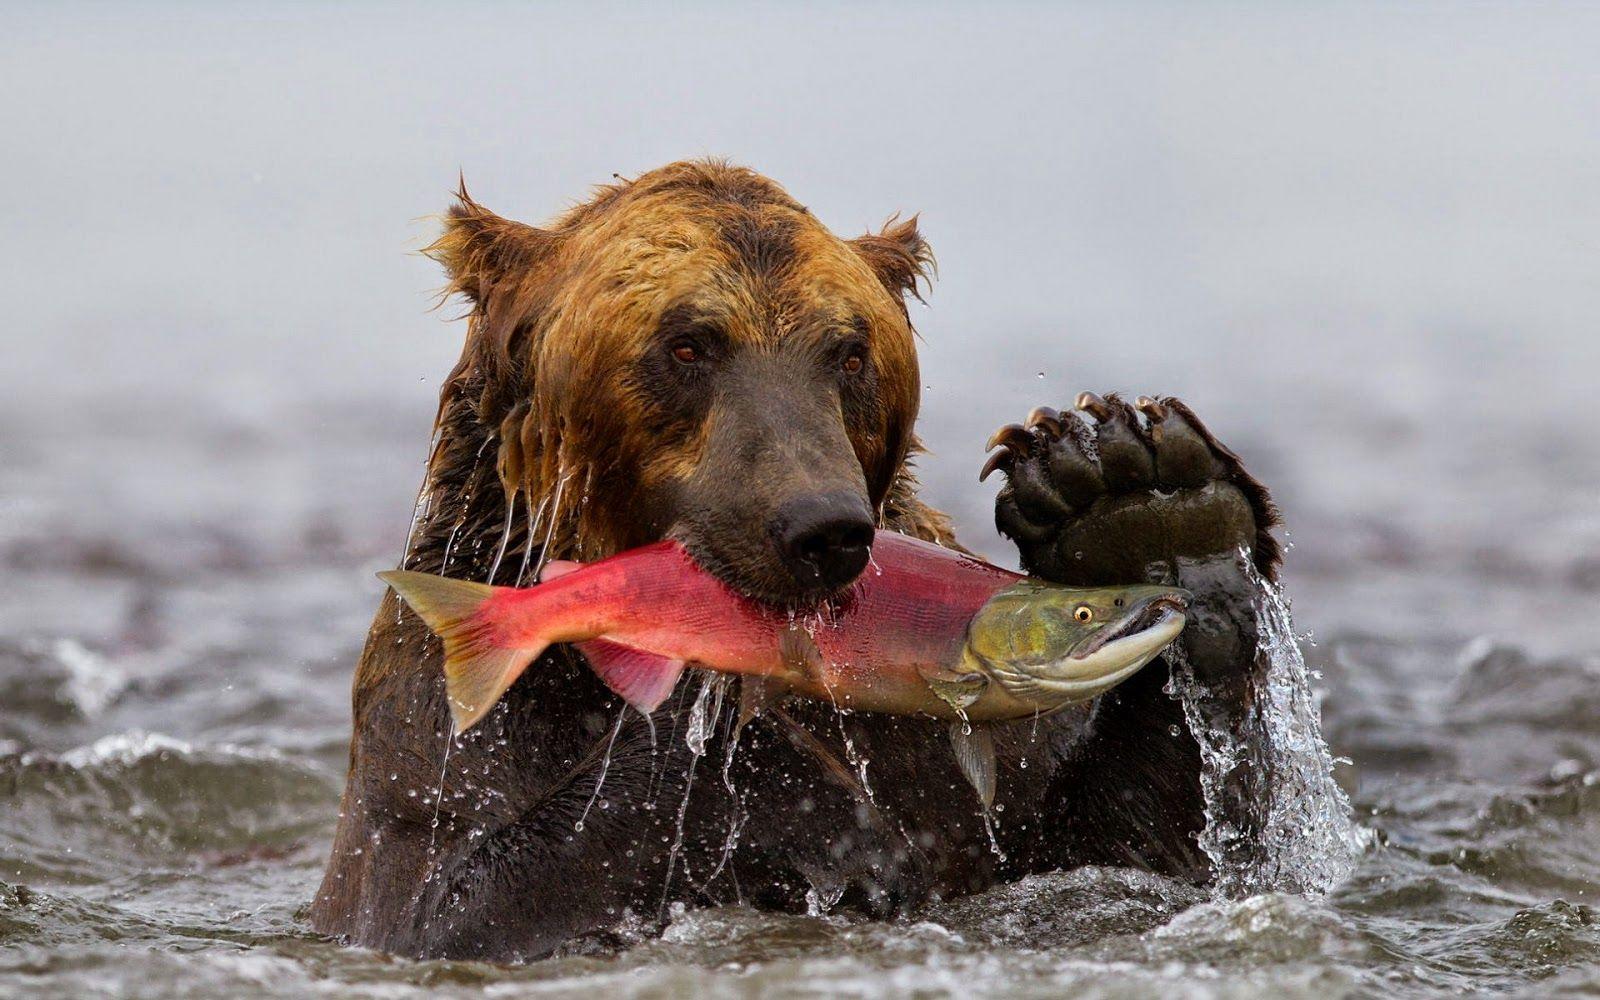 Grizzly bear with big fish in mouth. HD Animals Wallpaper